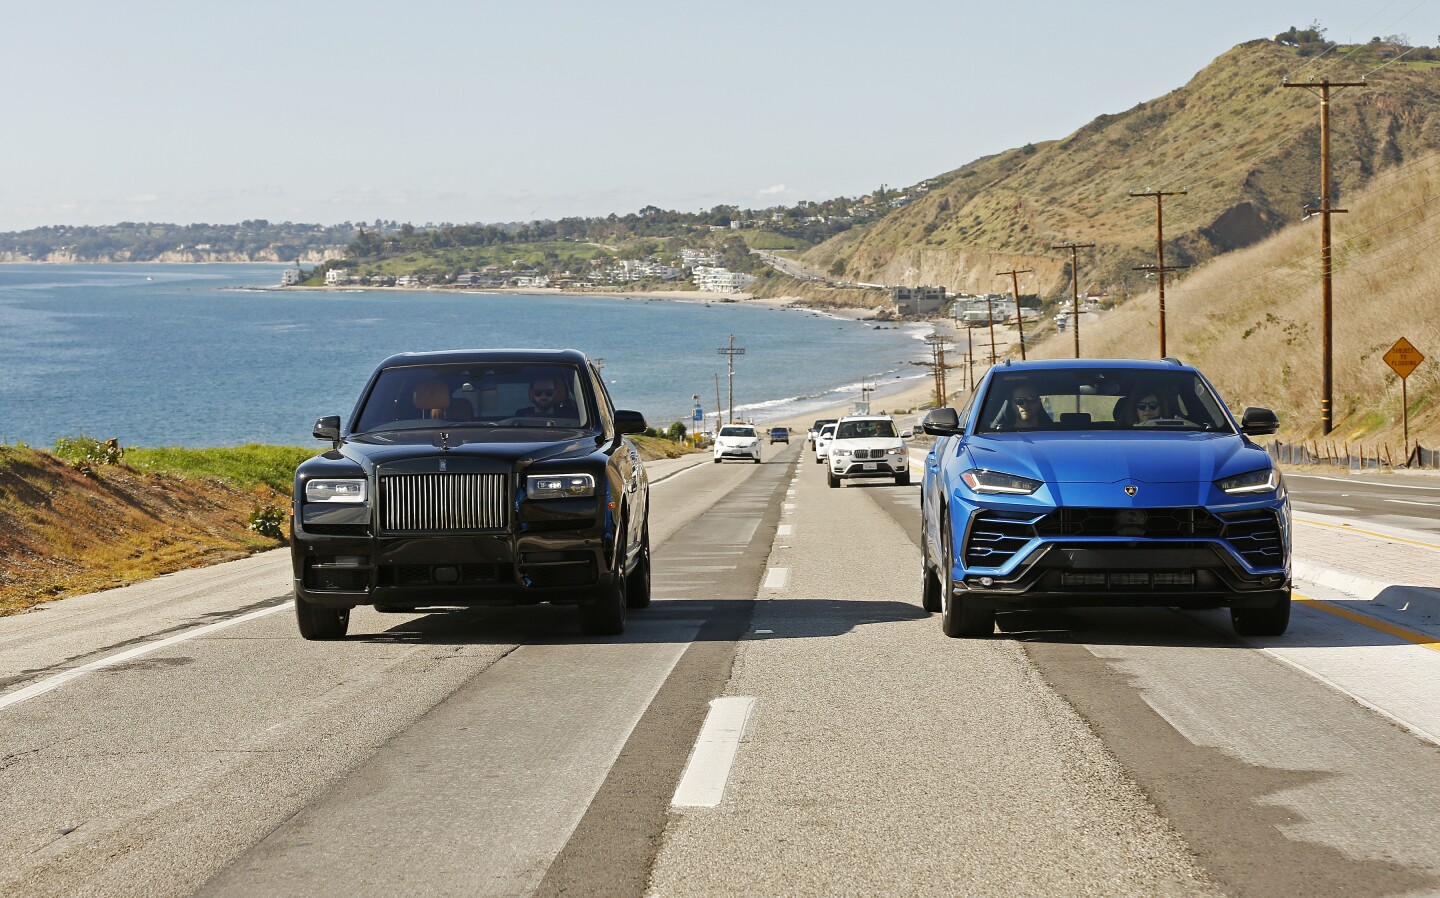 MALIBU, CA - JANUARY 21, 2020 The Lamborghini Urus in blue and the Rolls-Royce Cullinan in black are photographed in Malibu for a comparison with the rise of the UUV (ultra utility vehicle). The stars are the Lamborghini Urus and the Rolls-Royce Cullinan with a two-fold vibe; elegant and urban; and sandy/beachy/off-road.(Al Seib / Los Angeles Times)